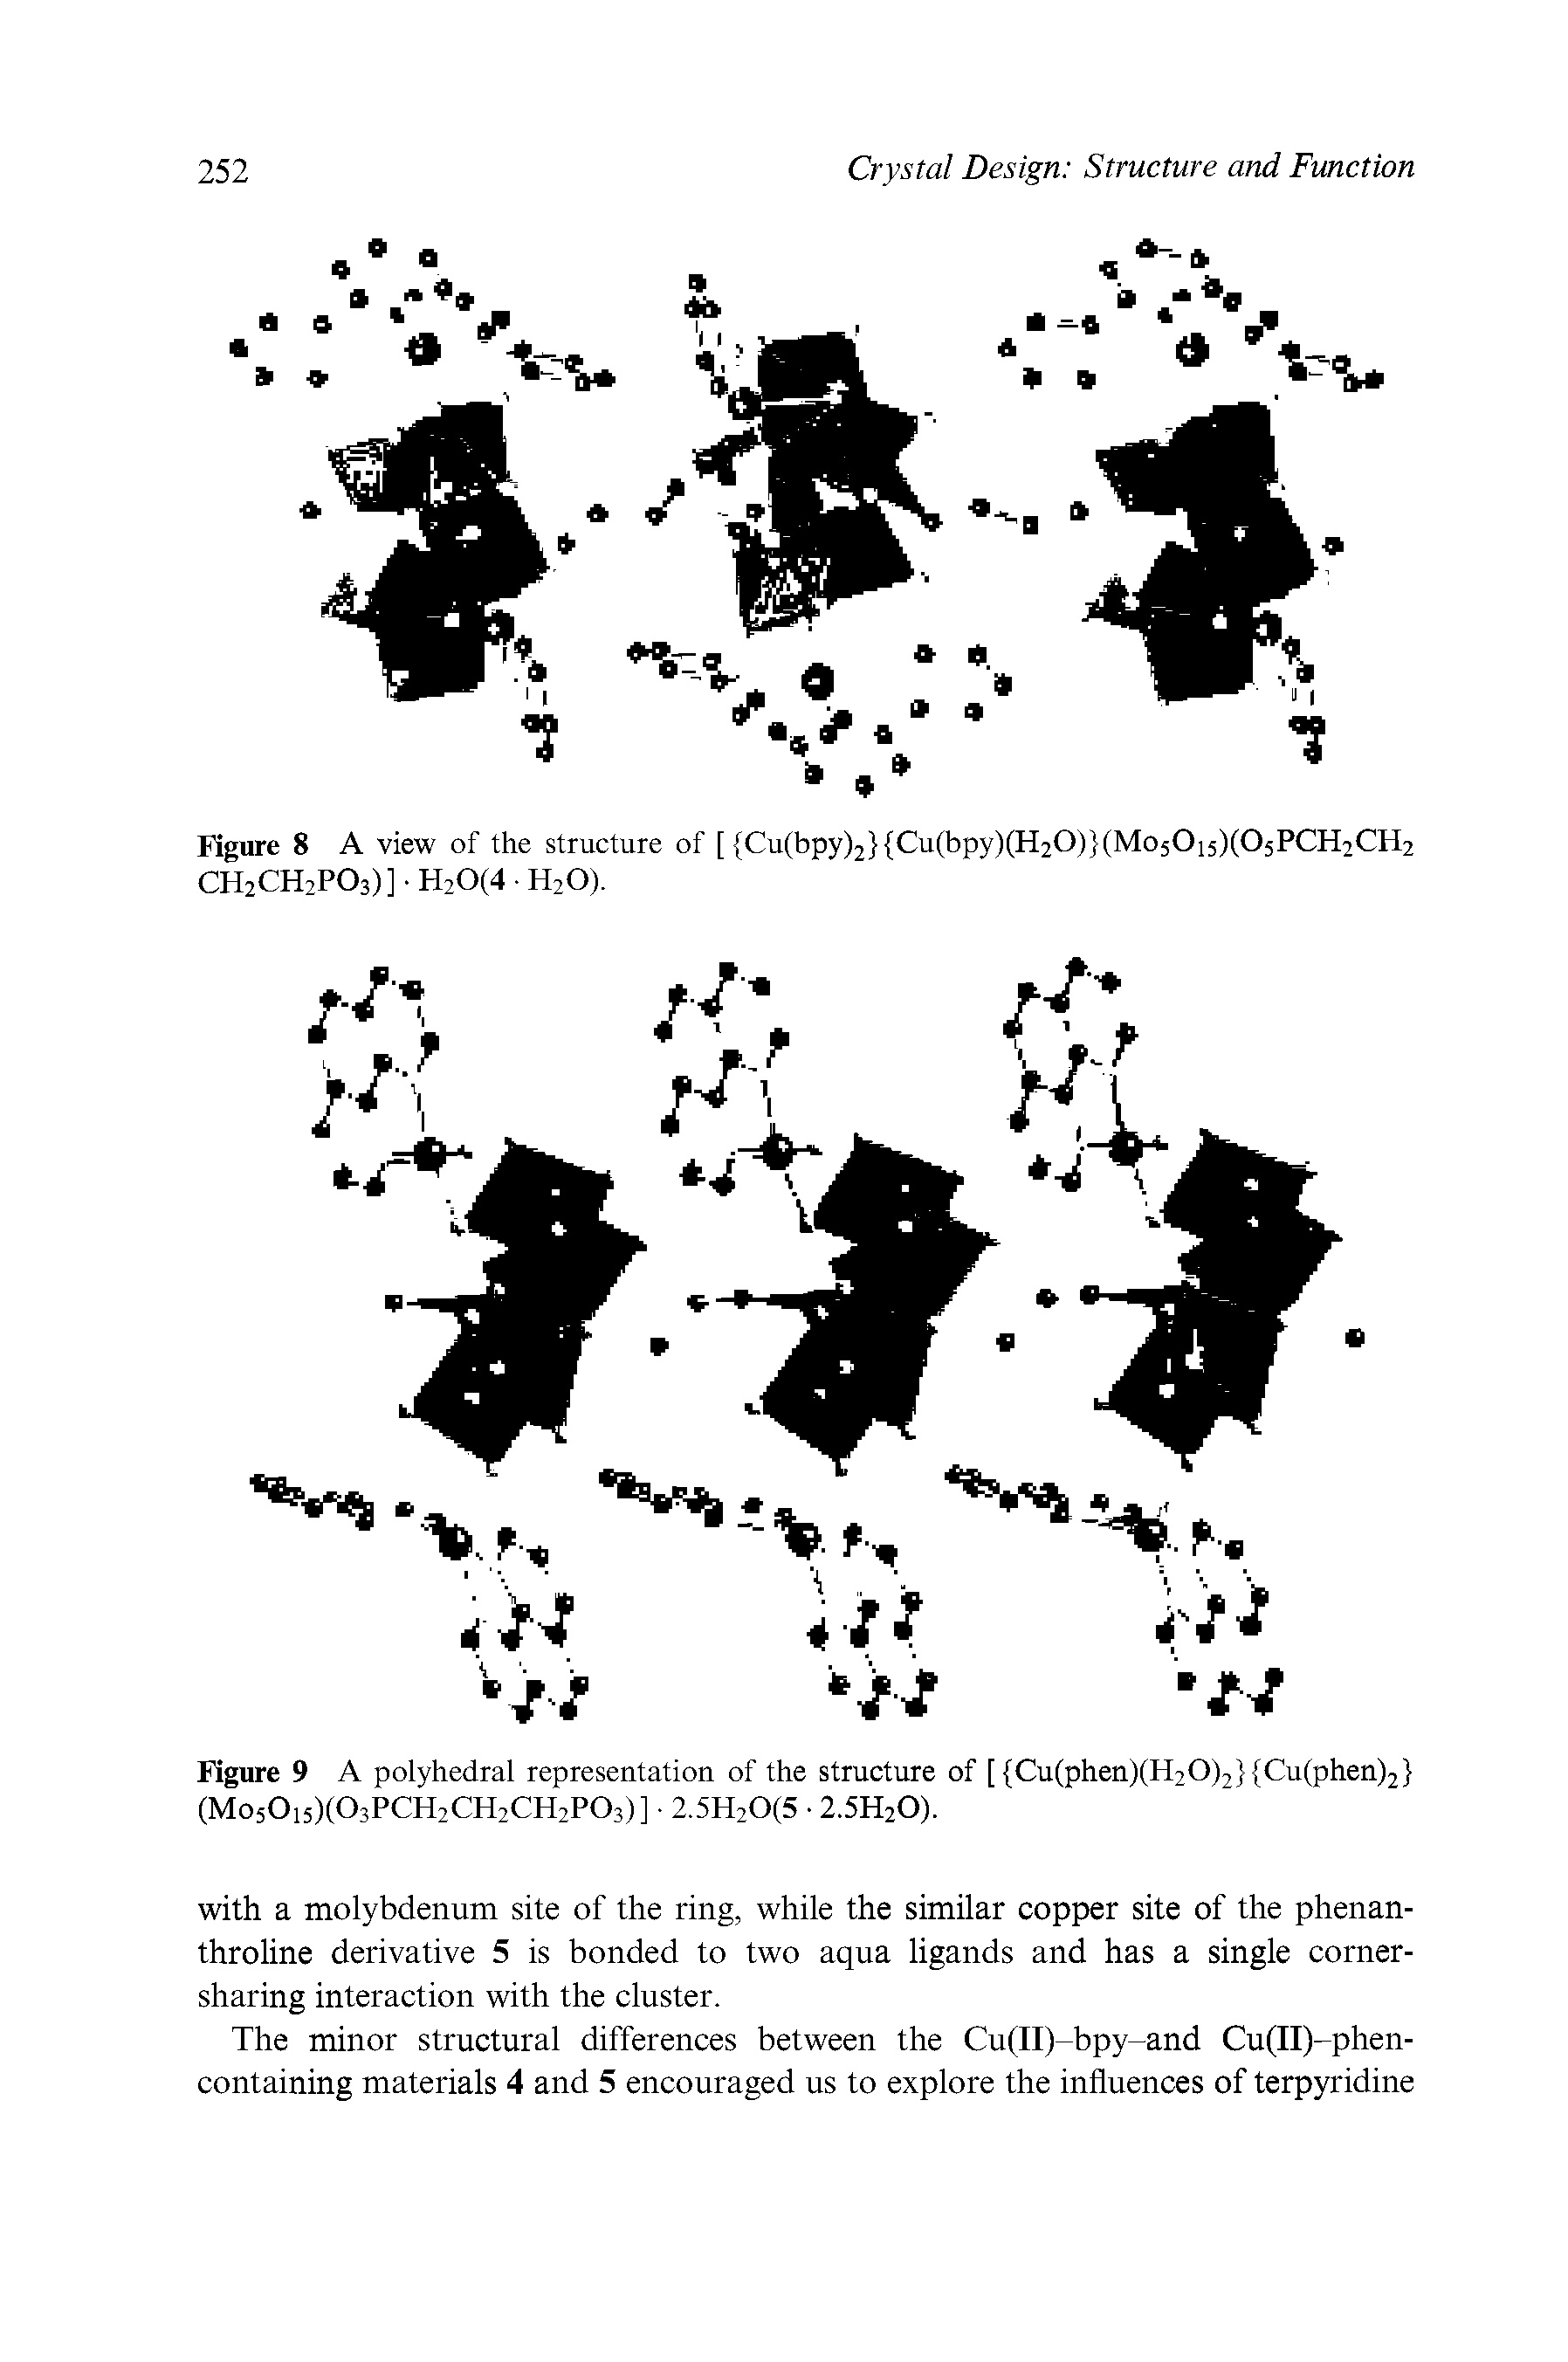 Figure 9 A polyhedral representation of the structure of [ Cu(phen)(H20)2 Cu(phen)2 (M05O15XO3PCH2CH2CH2PO3)] 2.5H20(5 2.5H20).